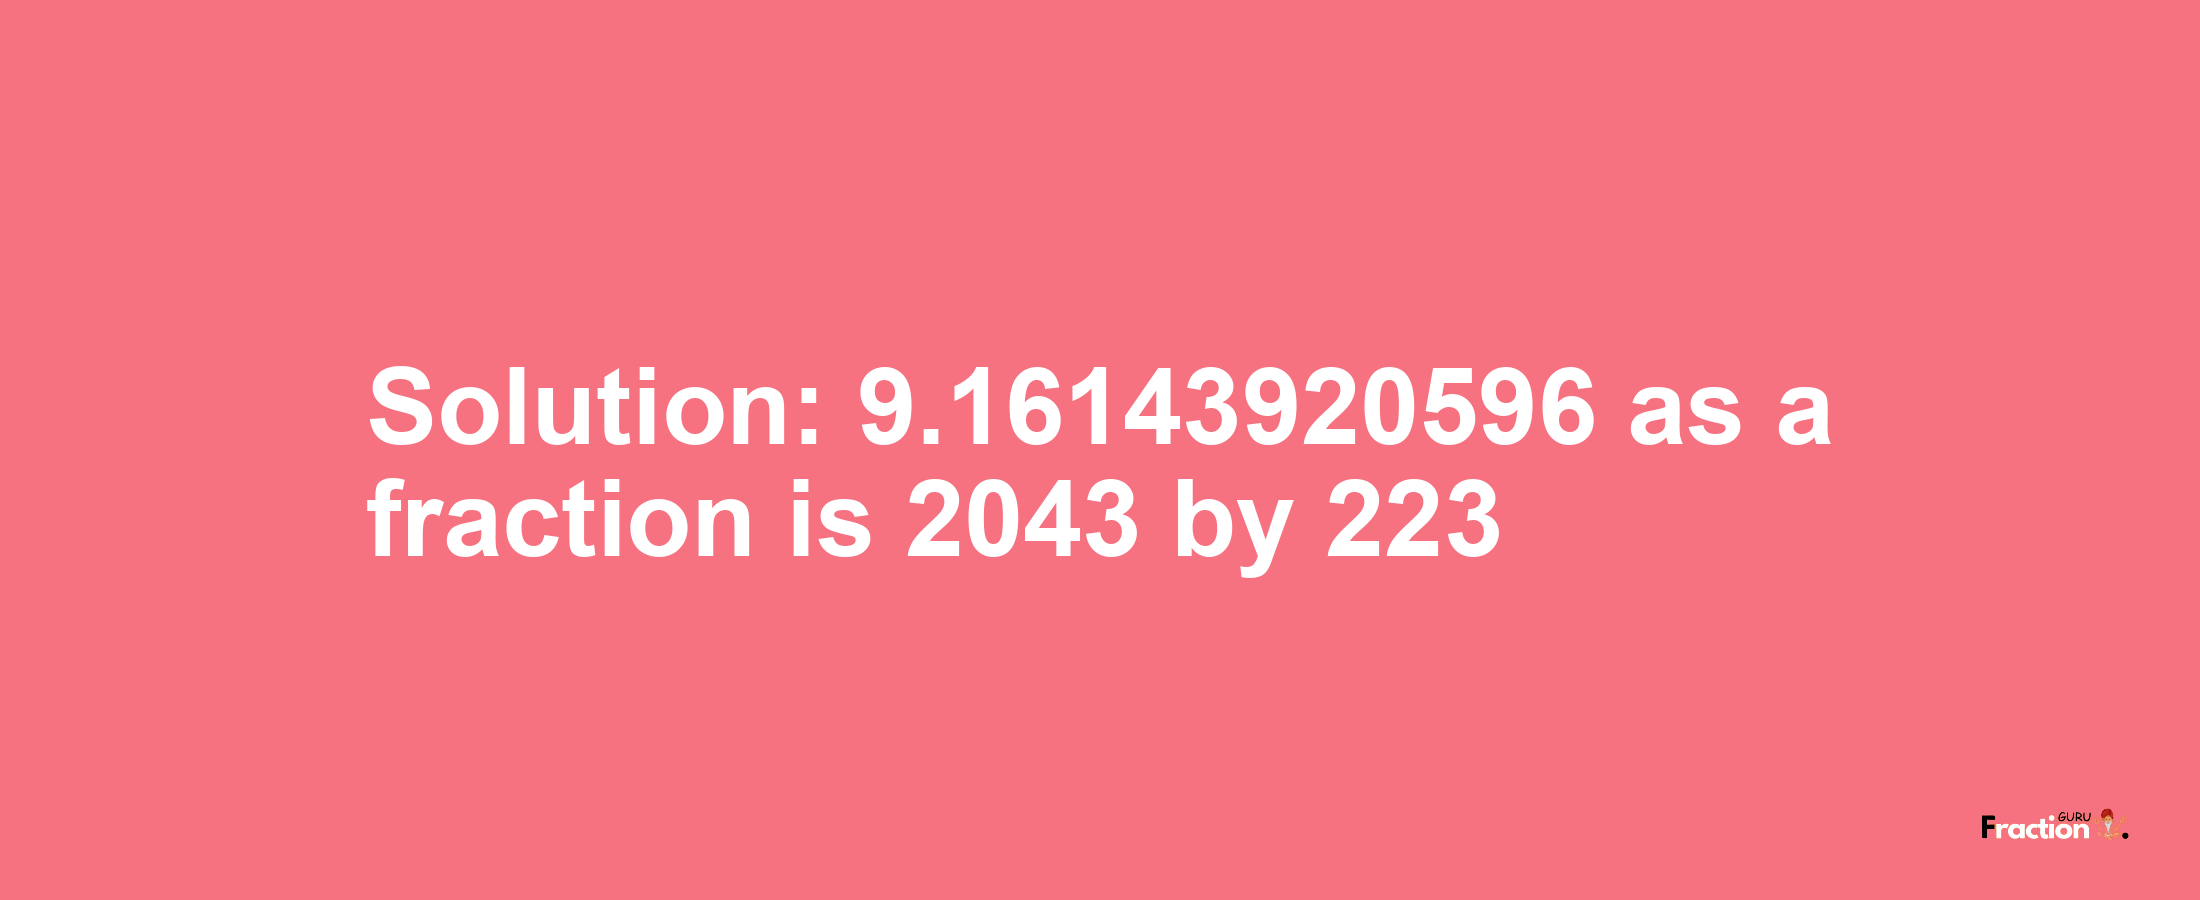 Solution:9.16143920596 as a fraction is 2043/223